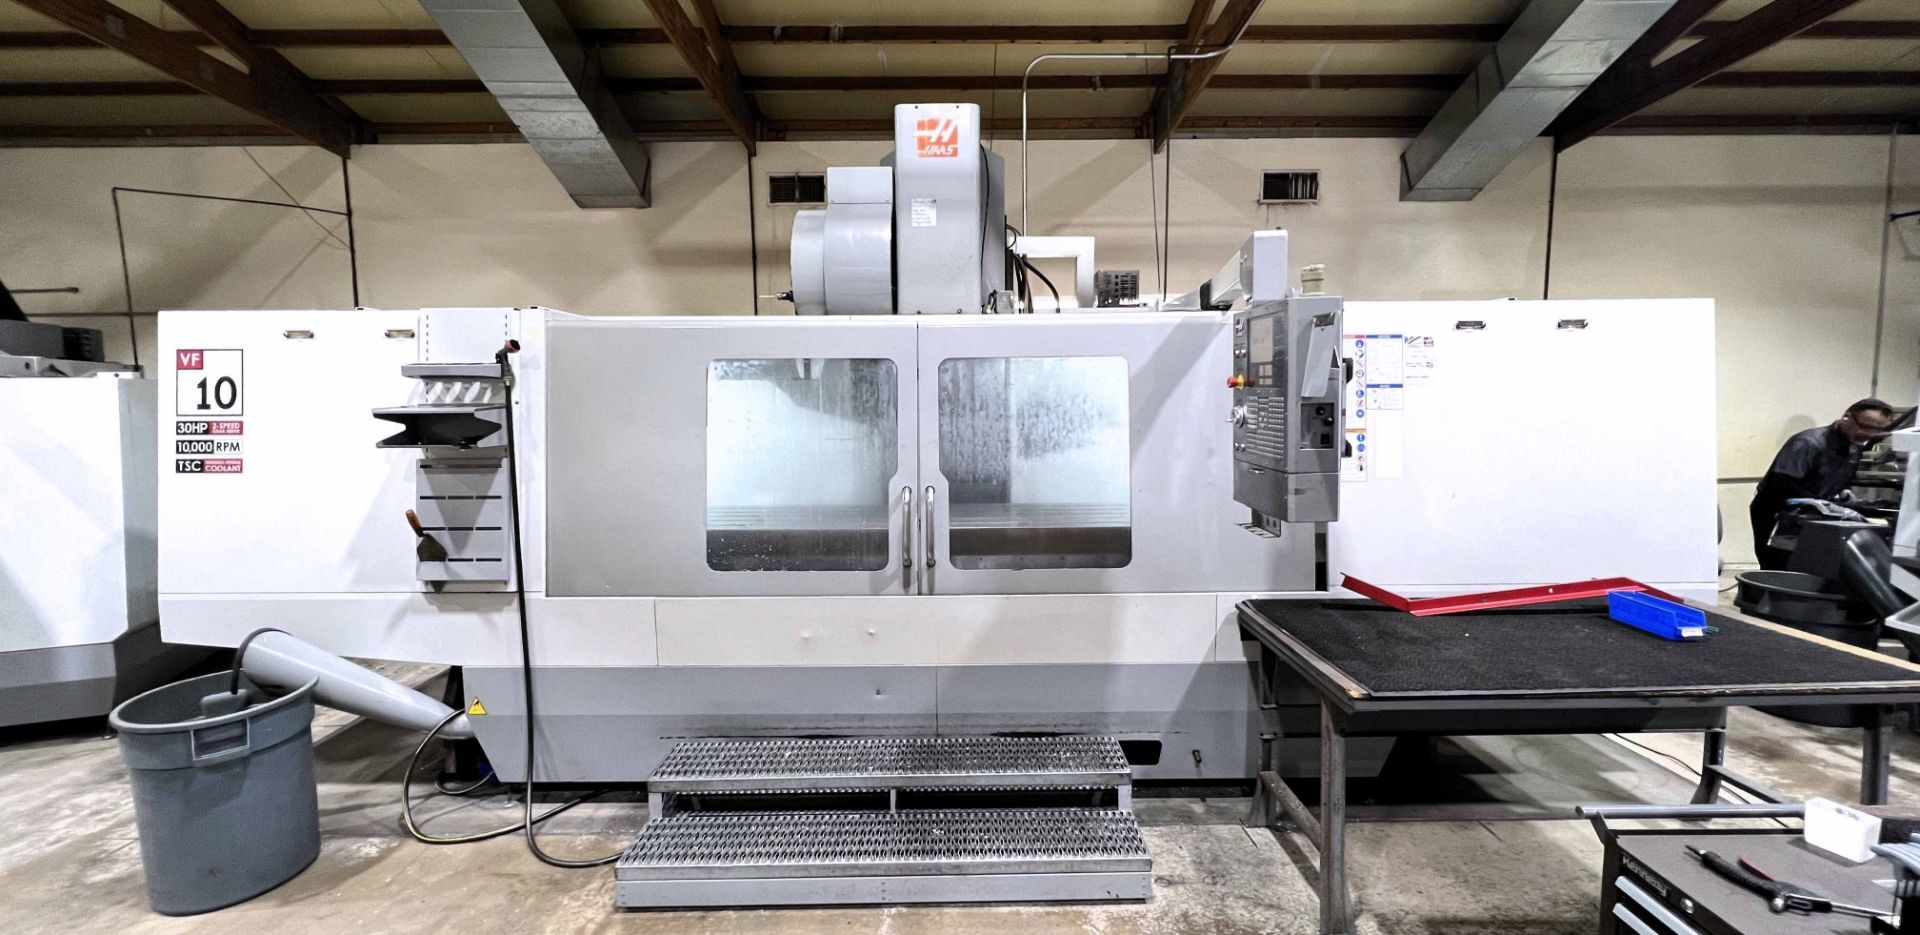 Haas VF-10B Vertical Machining Center (2007) - Image 2 of 11